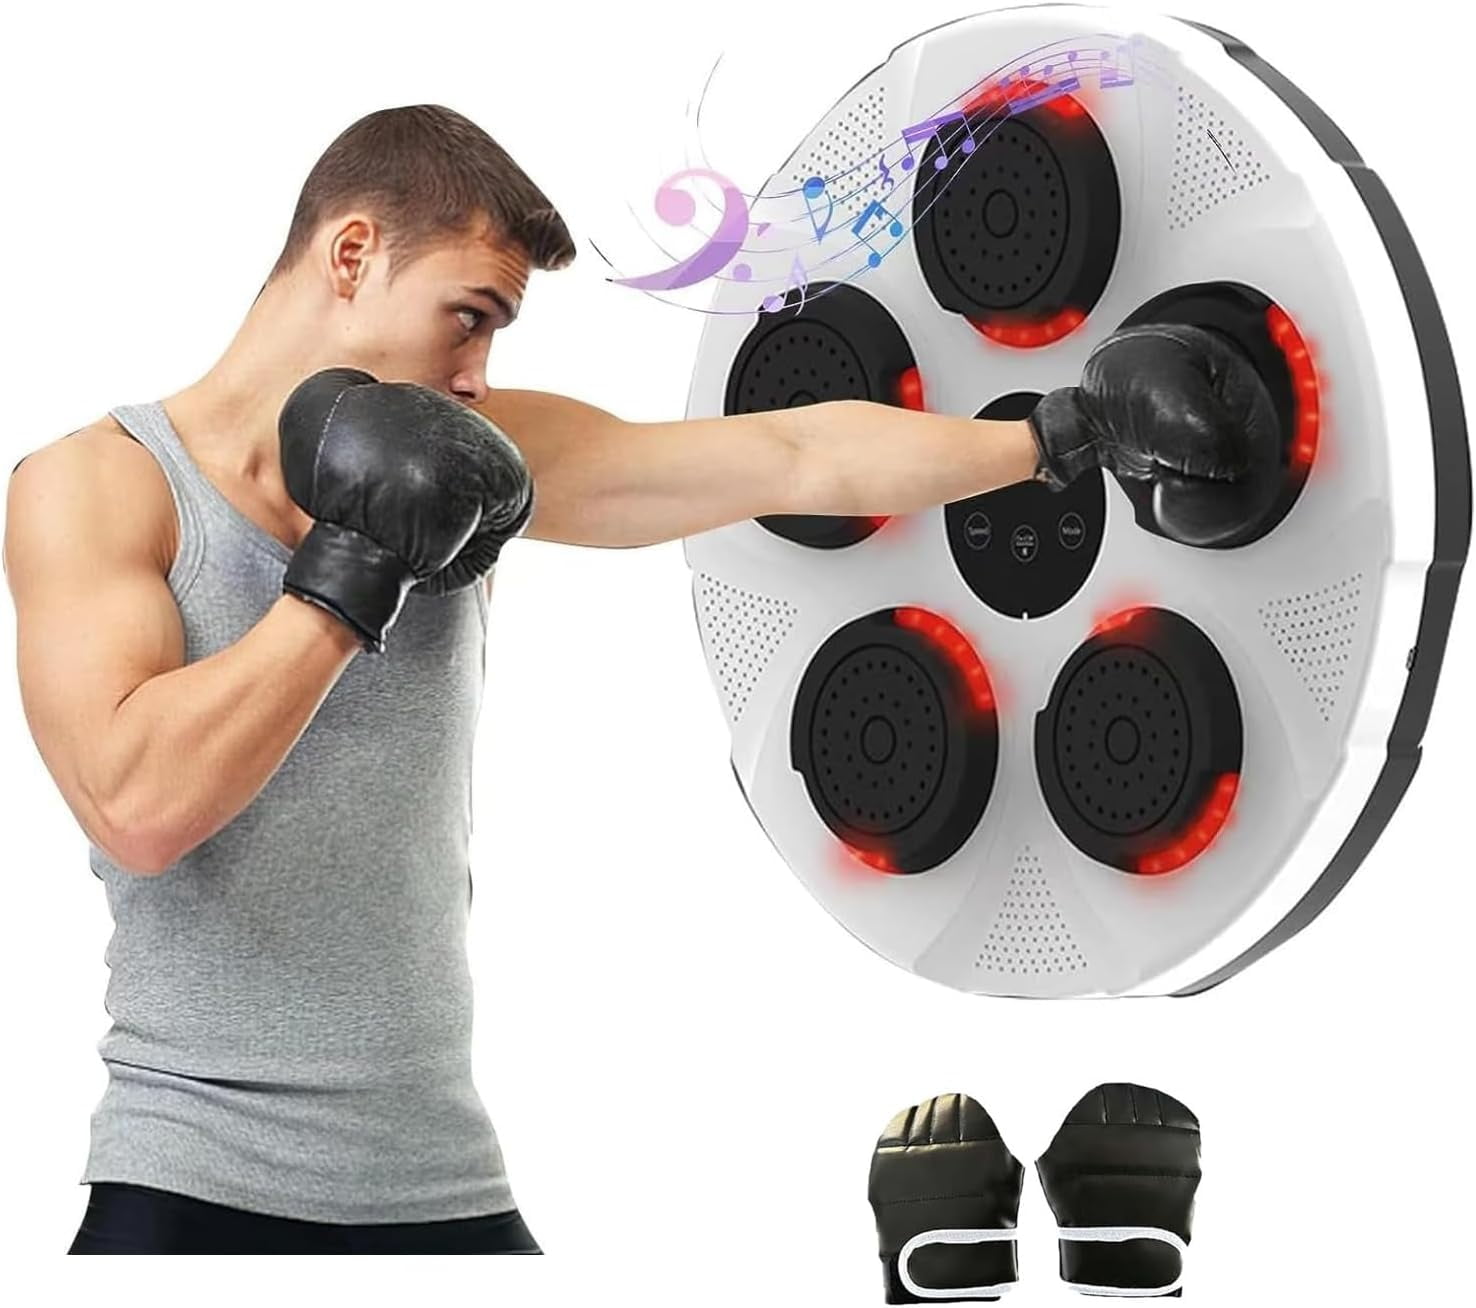 Wall Mounted Smart Boxing Music Box Pad: Ideal for Fitness and